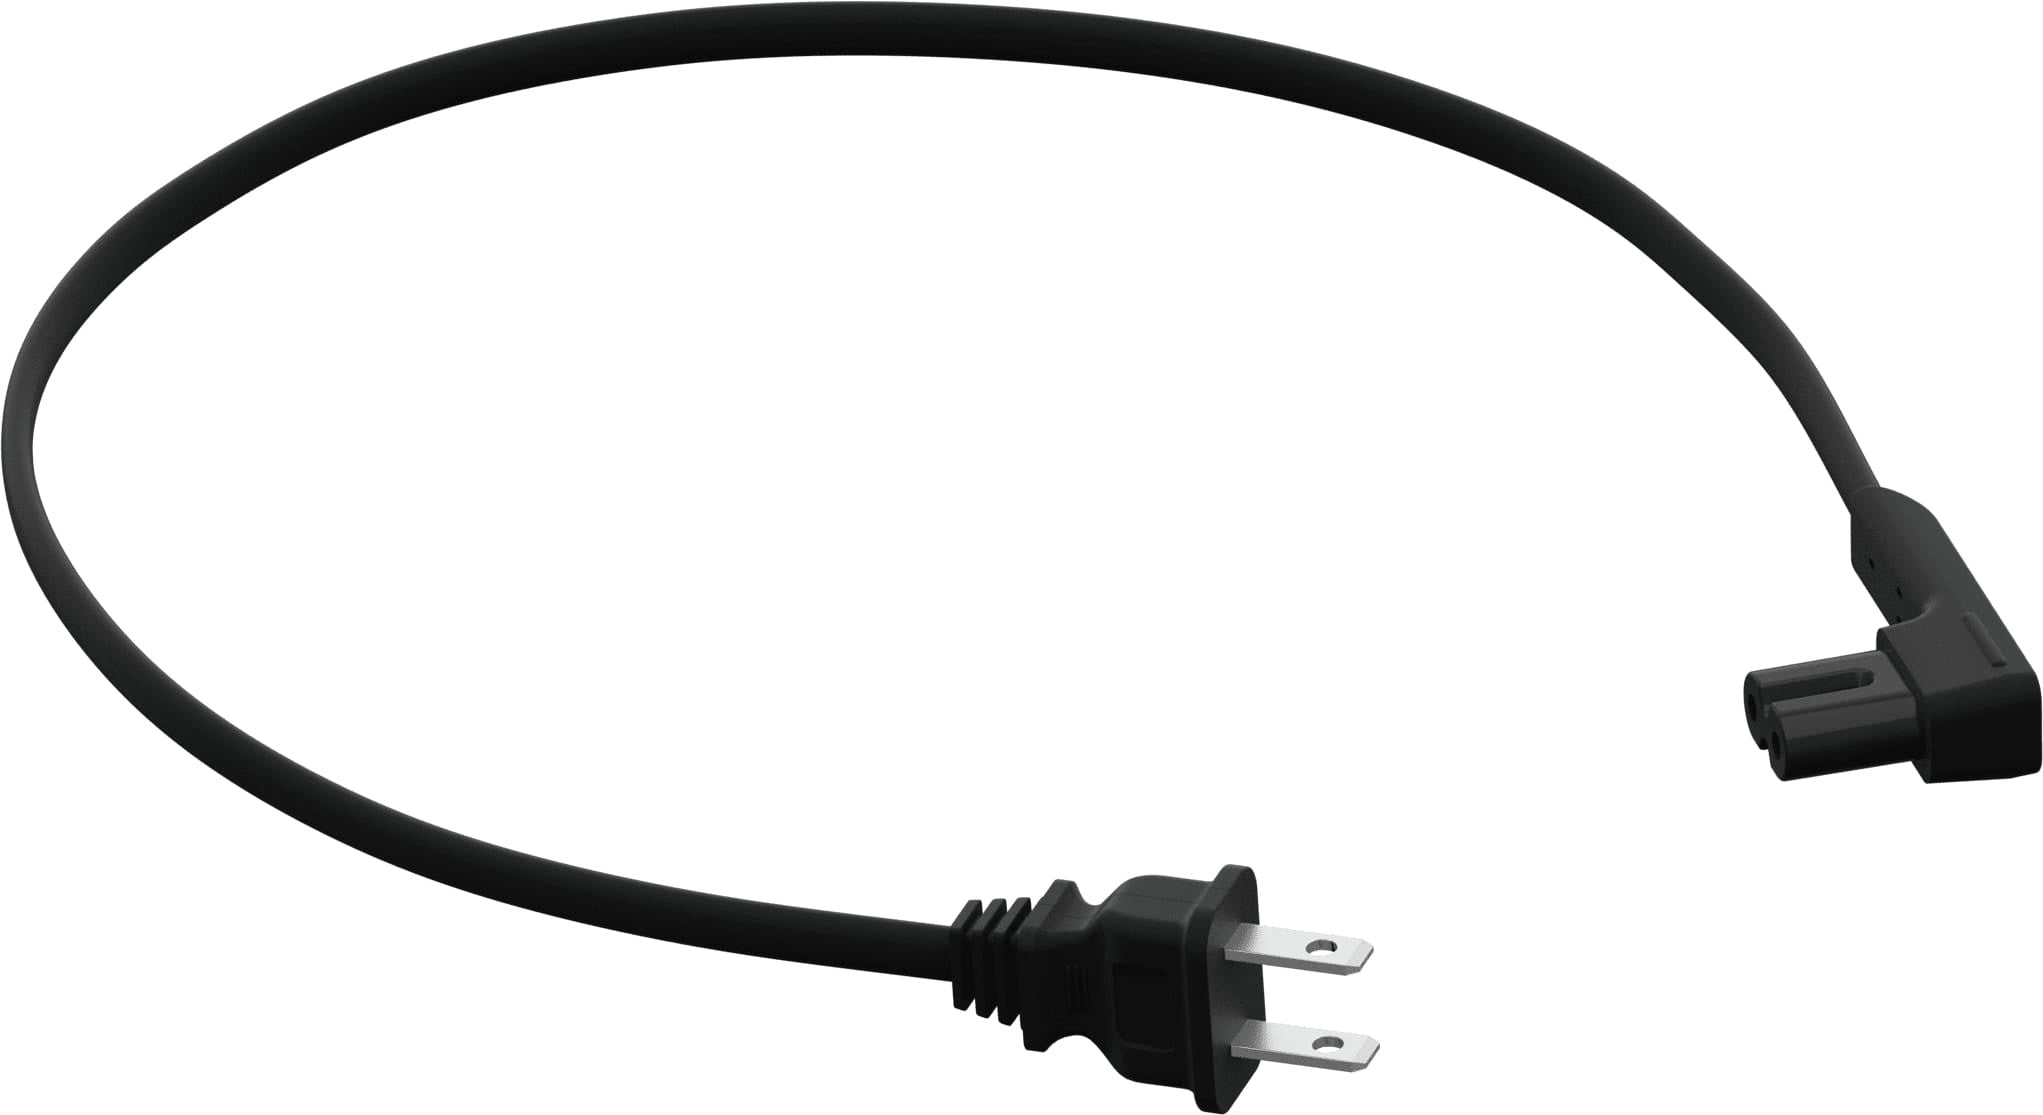 One/Play:1 Power Cable